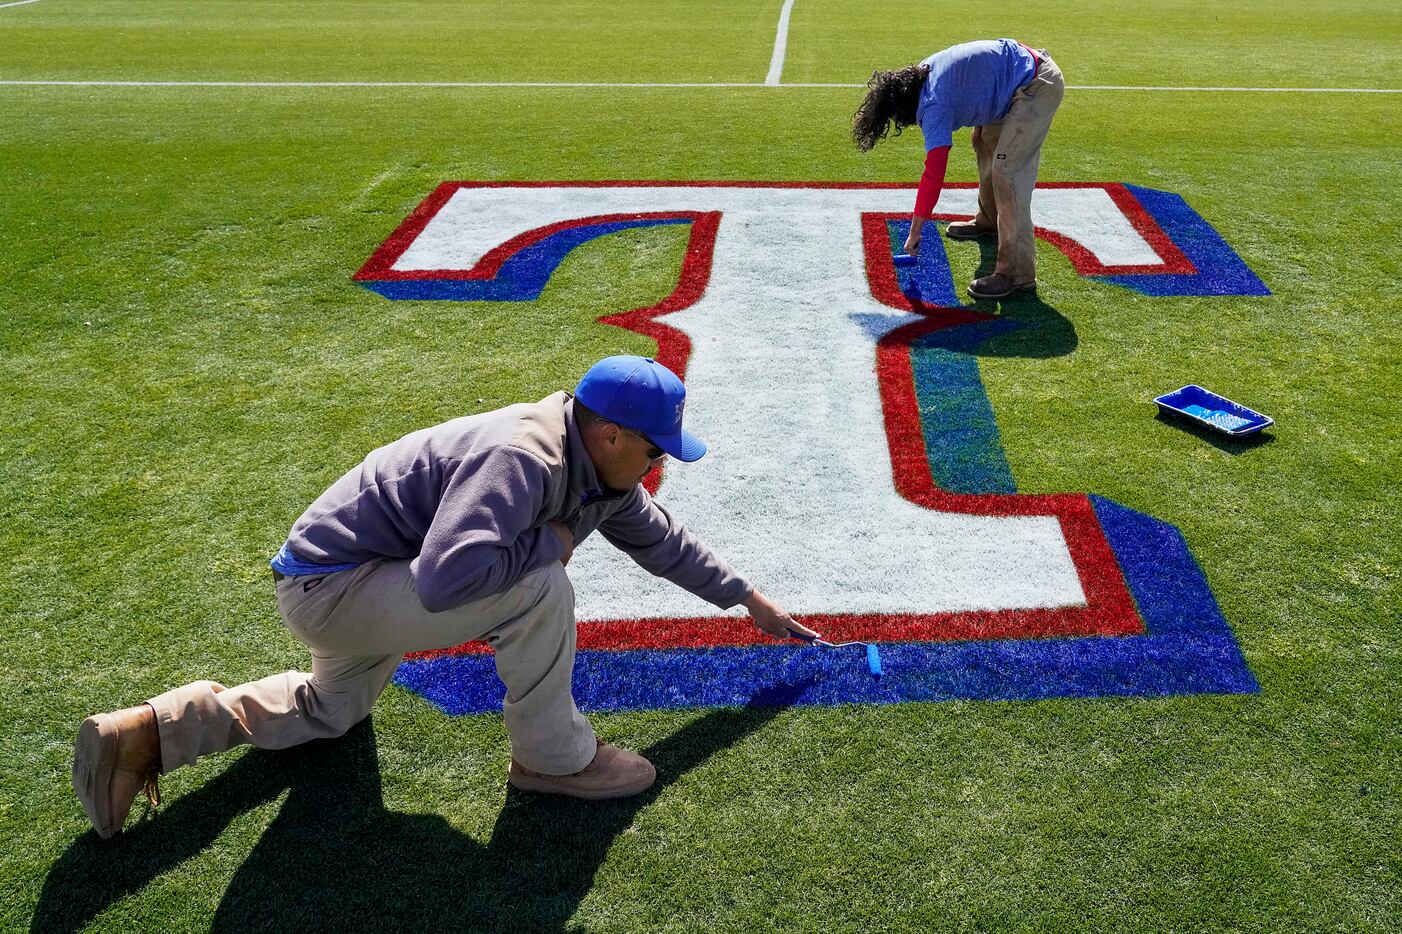 Brandon Rodriguez (left) and Anthony Encinas paint the team logo on a conditioning field...